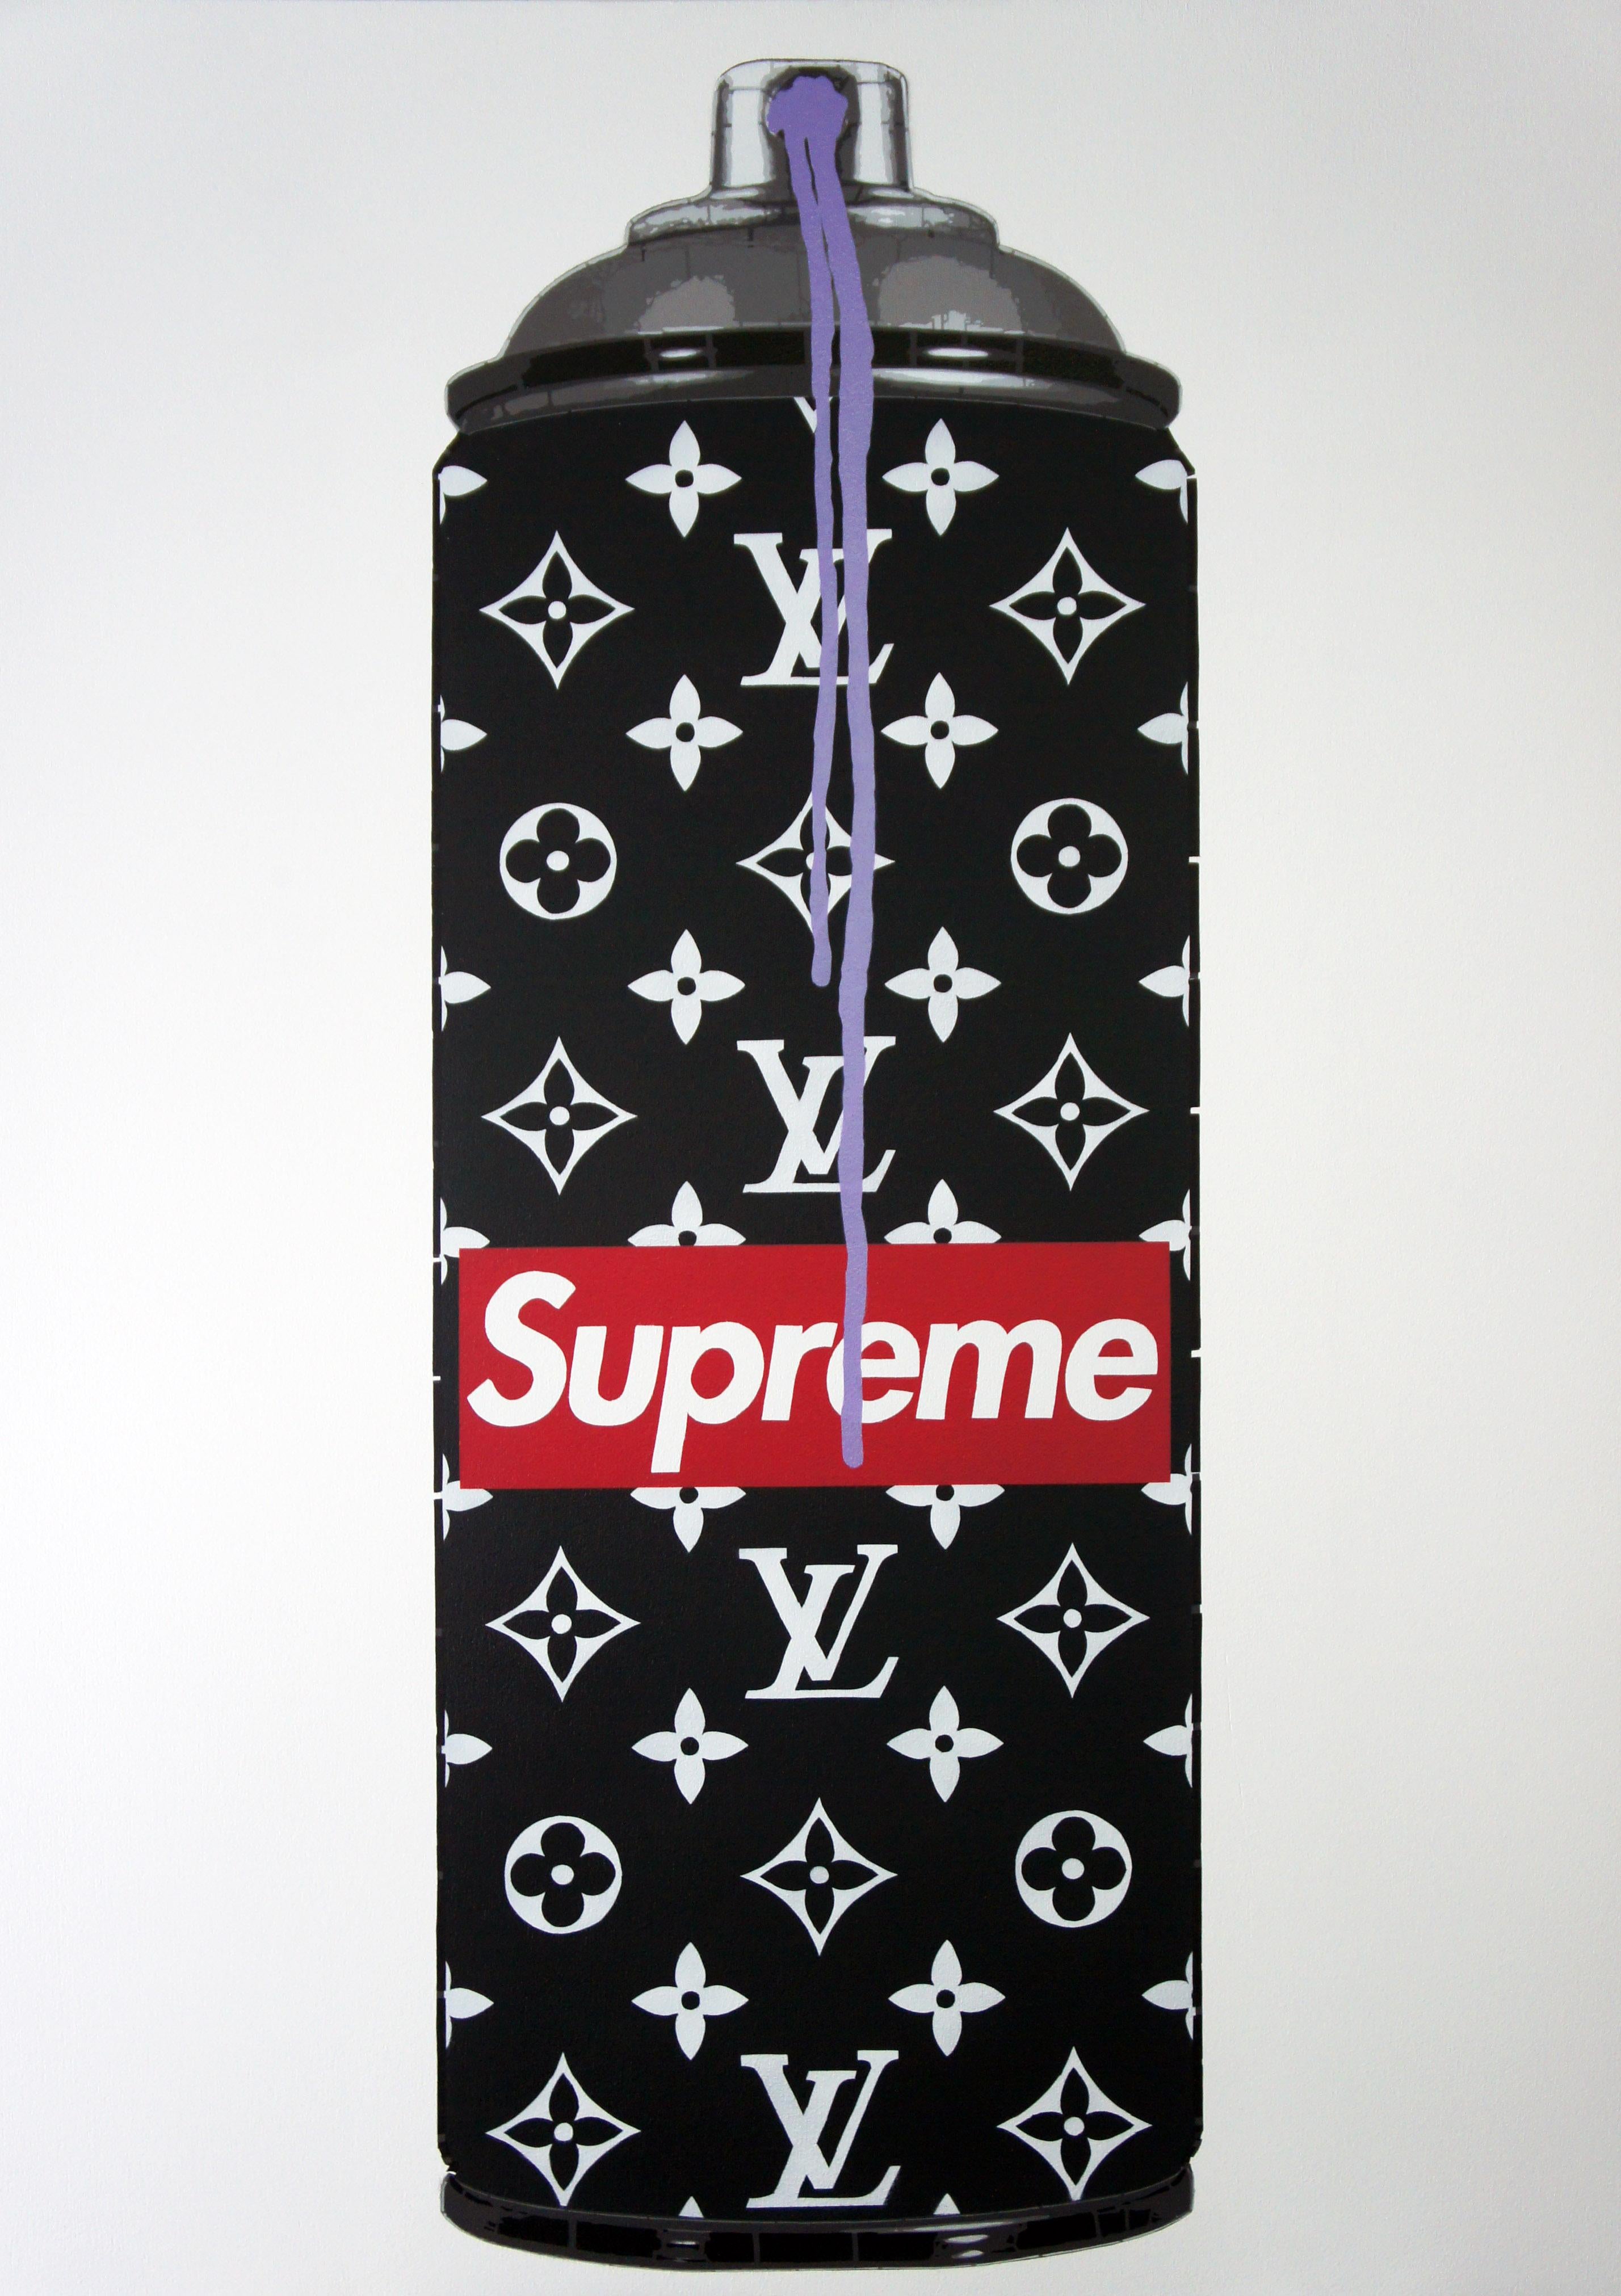 LV Supreme Zurich - Painting by Campbell la Pun